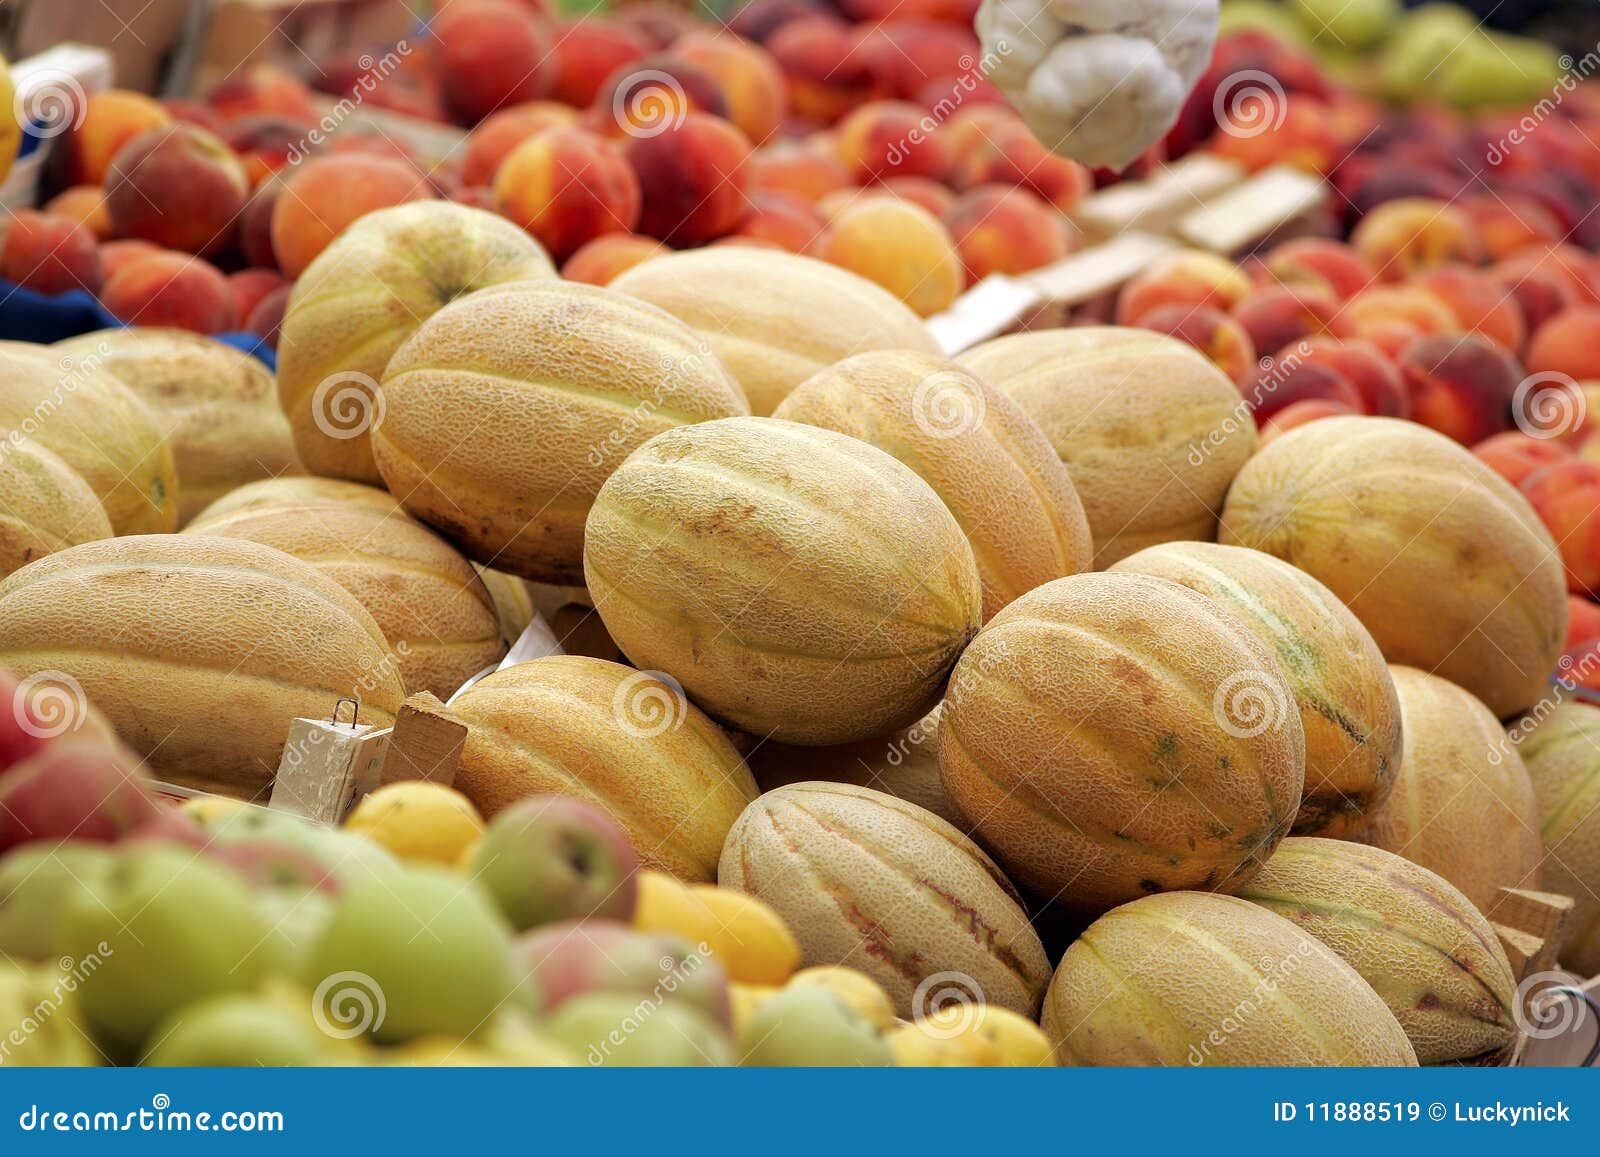 Cantaloupe,peaches and apples in one fruit street market during the summer